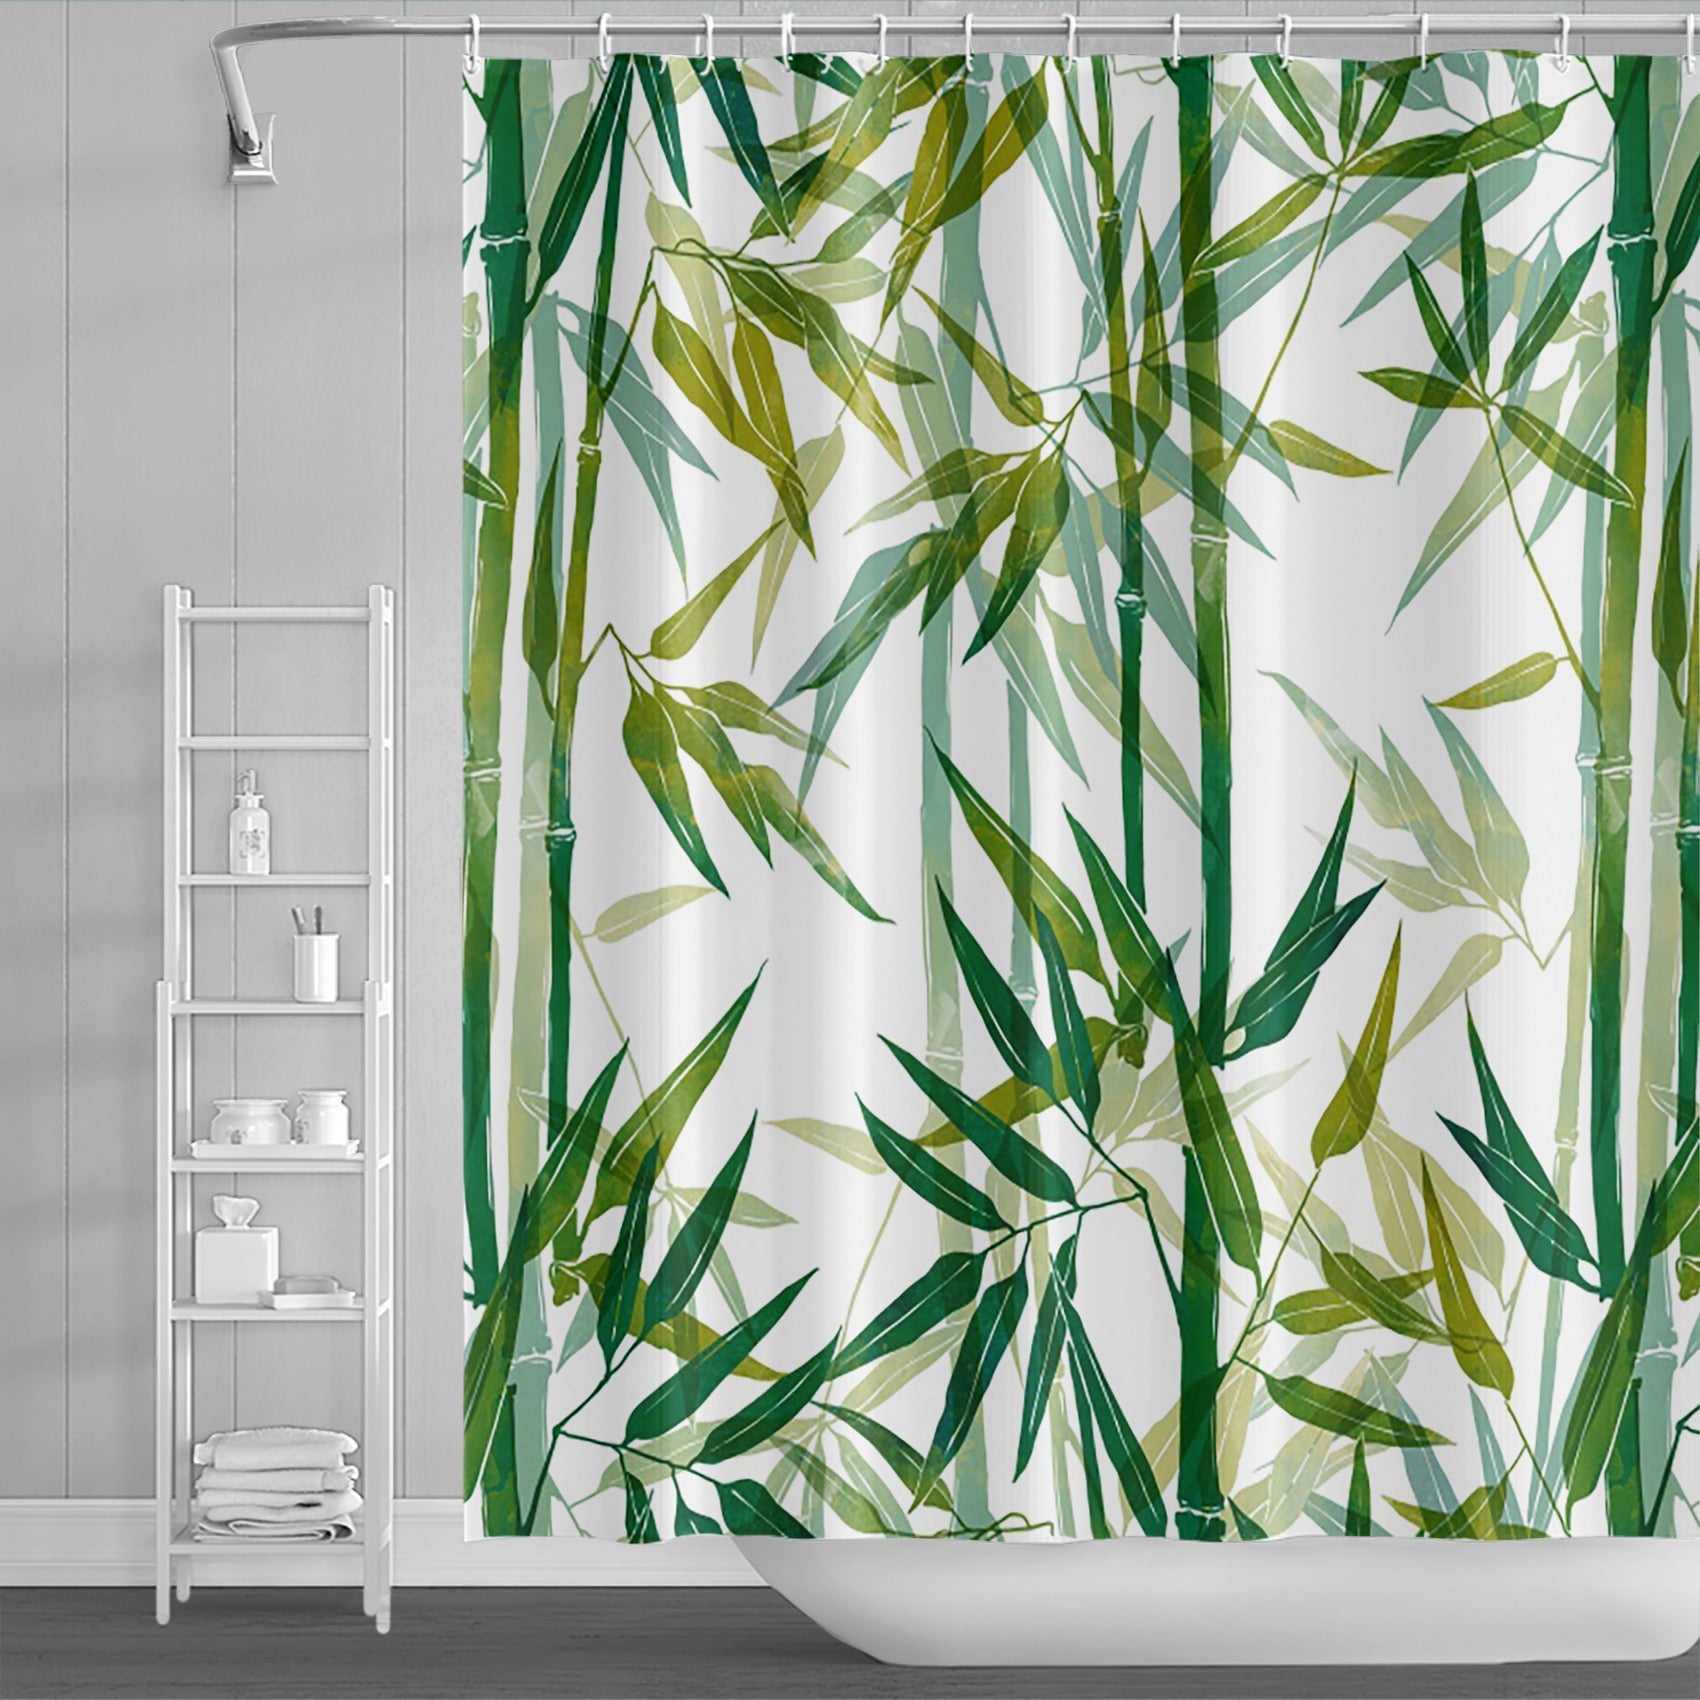 Bamboo-Themed Shower Curtains